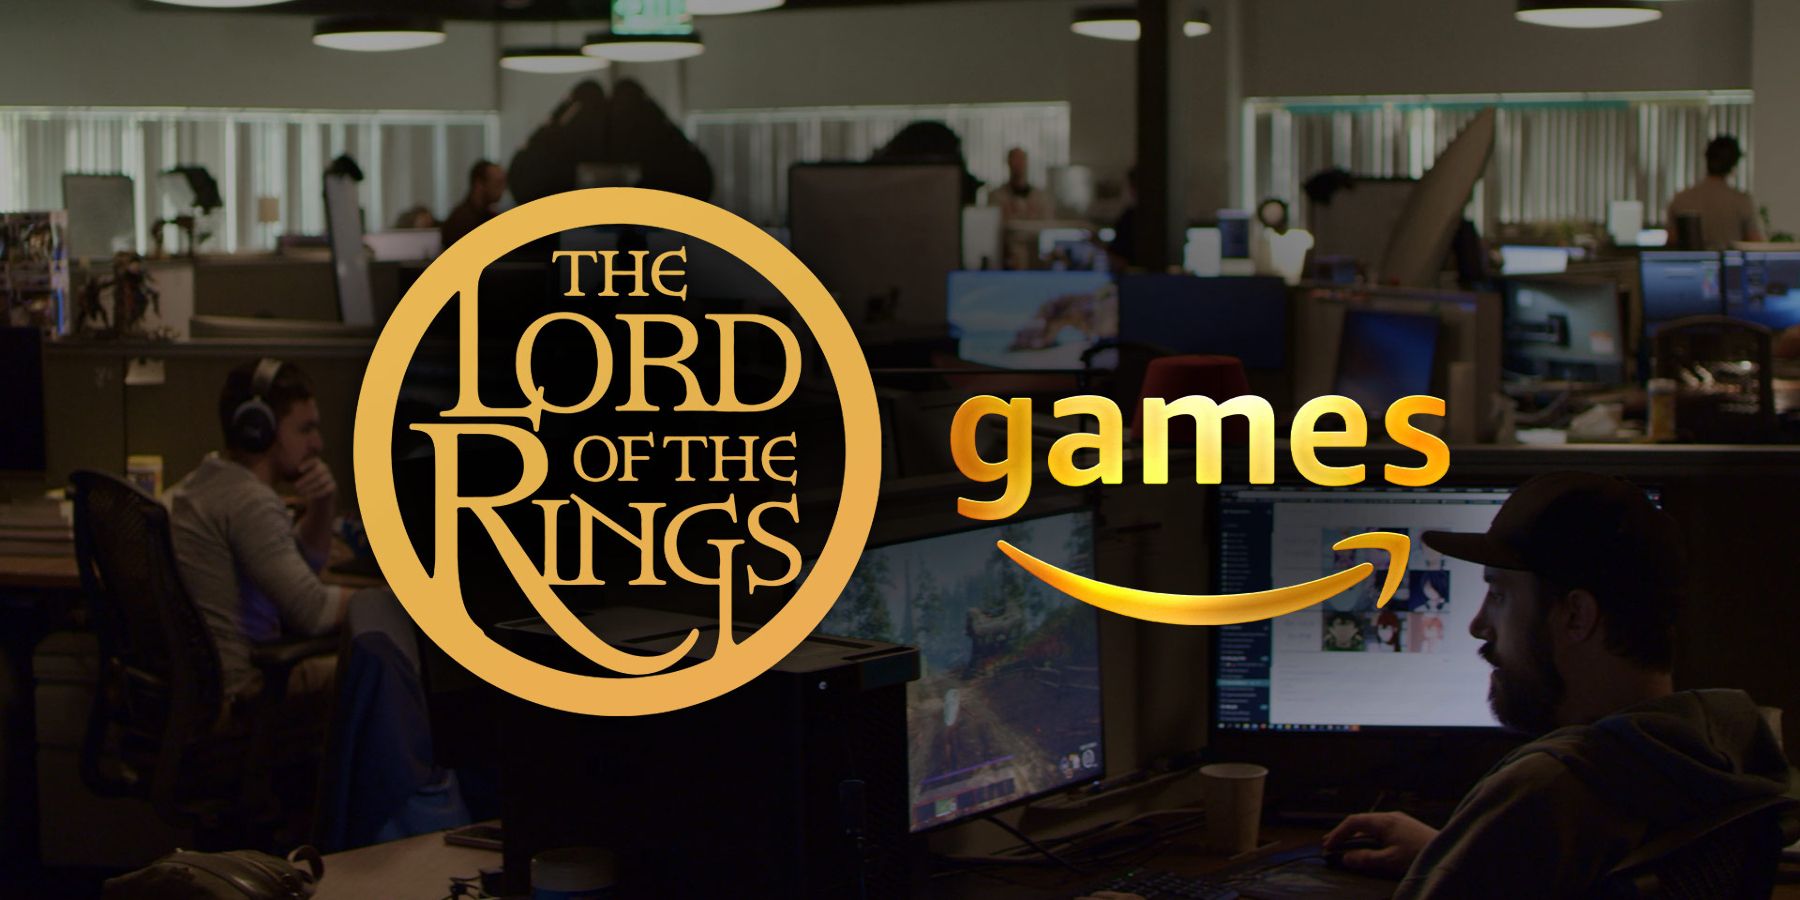 the lord of the rings amazon games logos